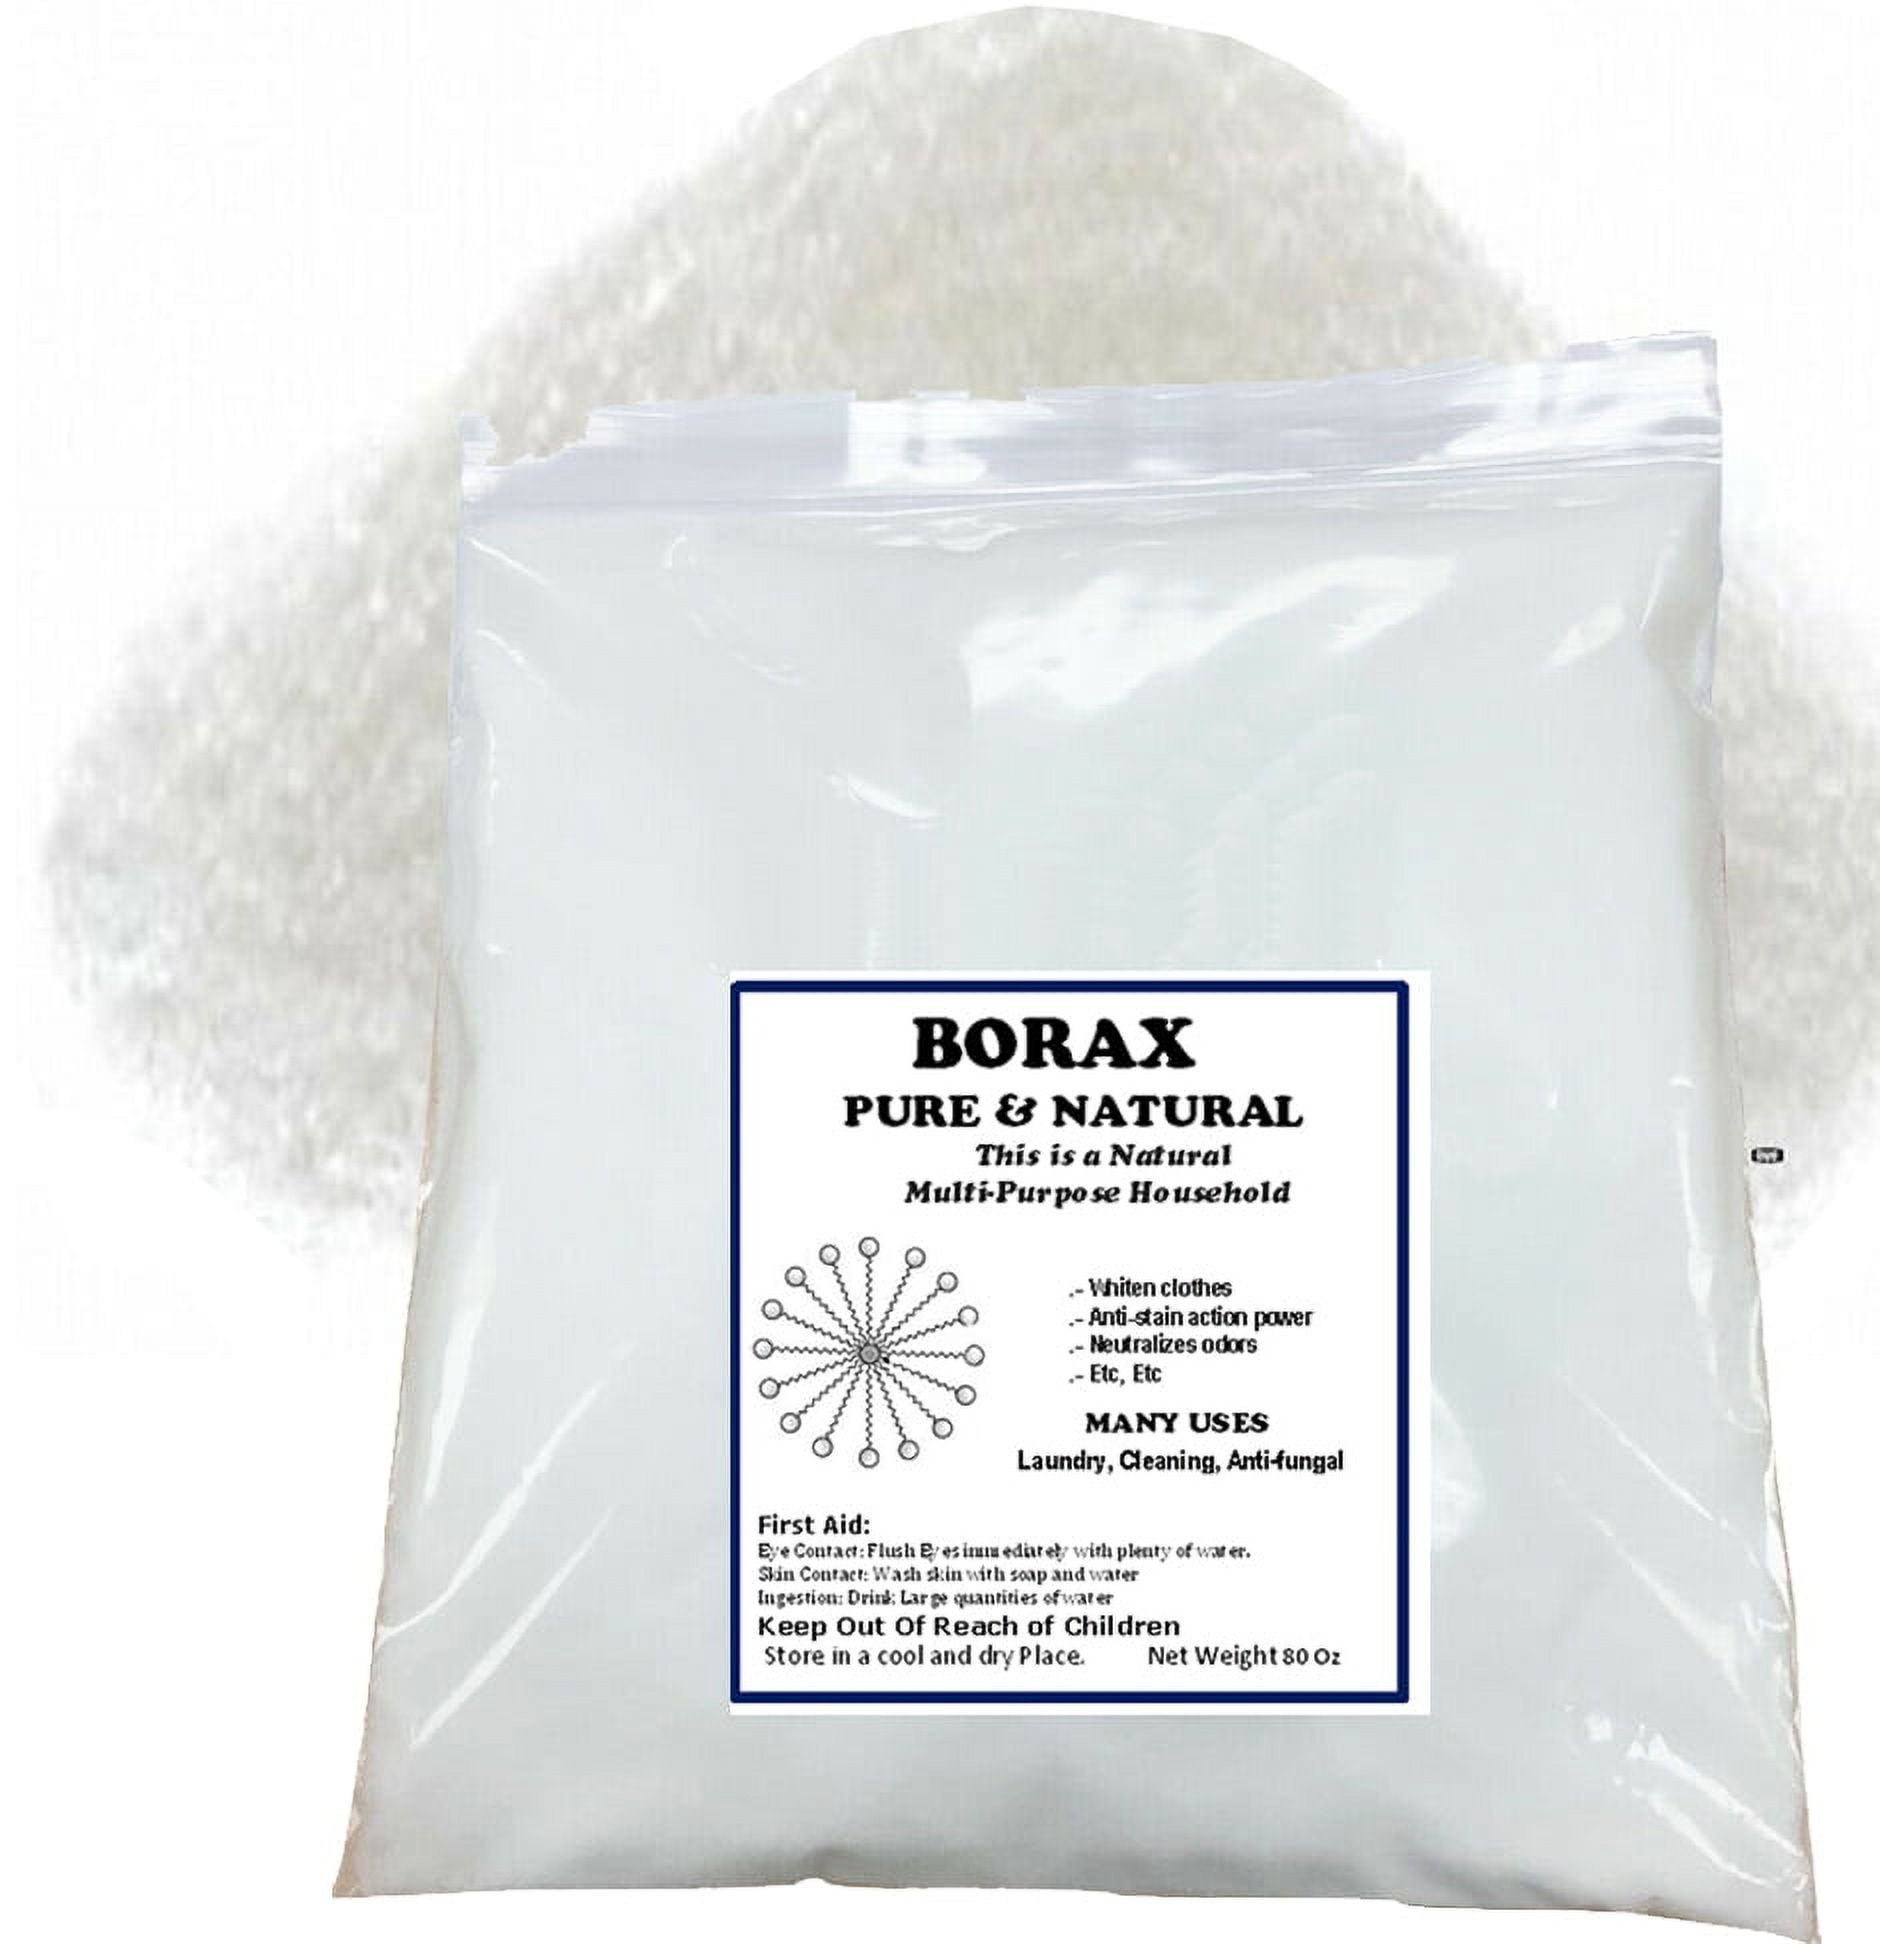 80 Oz BORAX POWDER PURE 100% NATURAL Laundry Boost & MANY OTHER USES